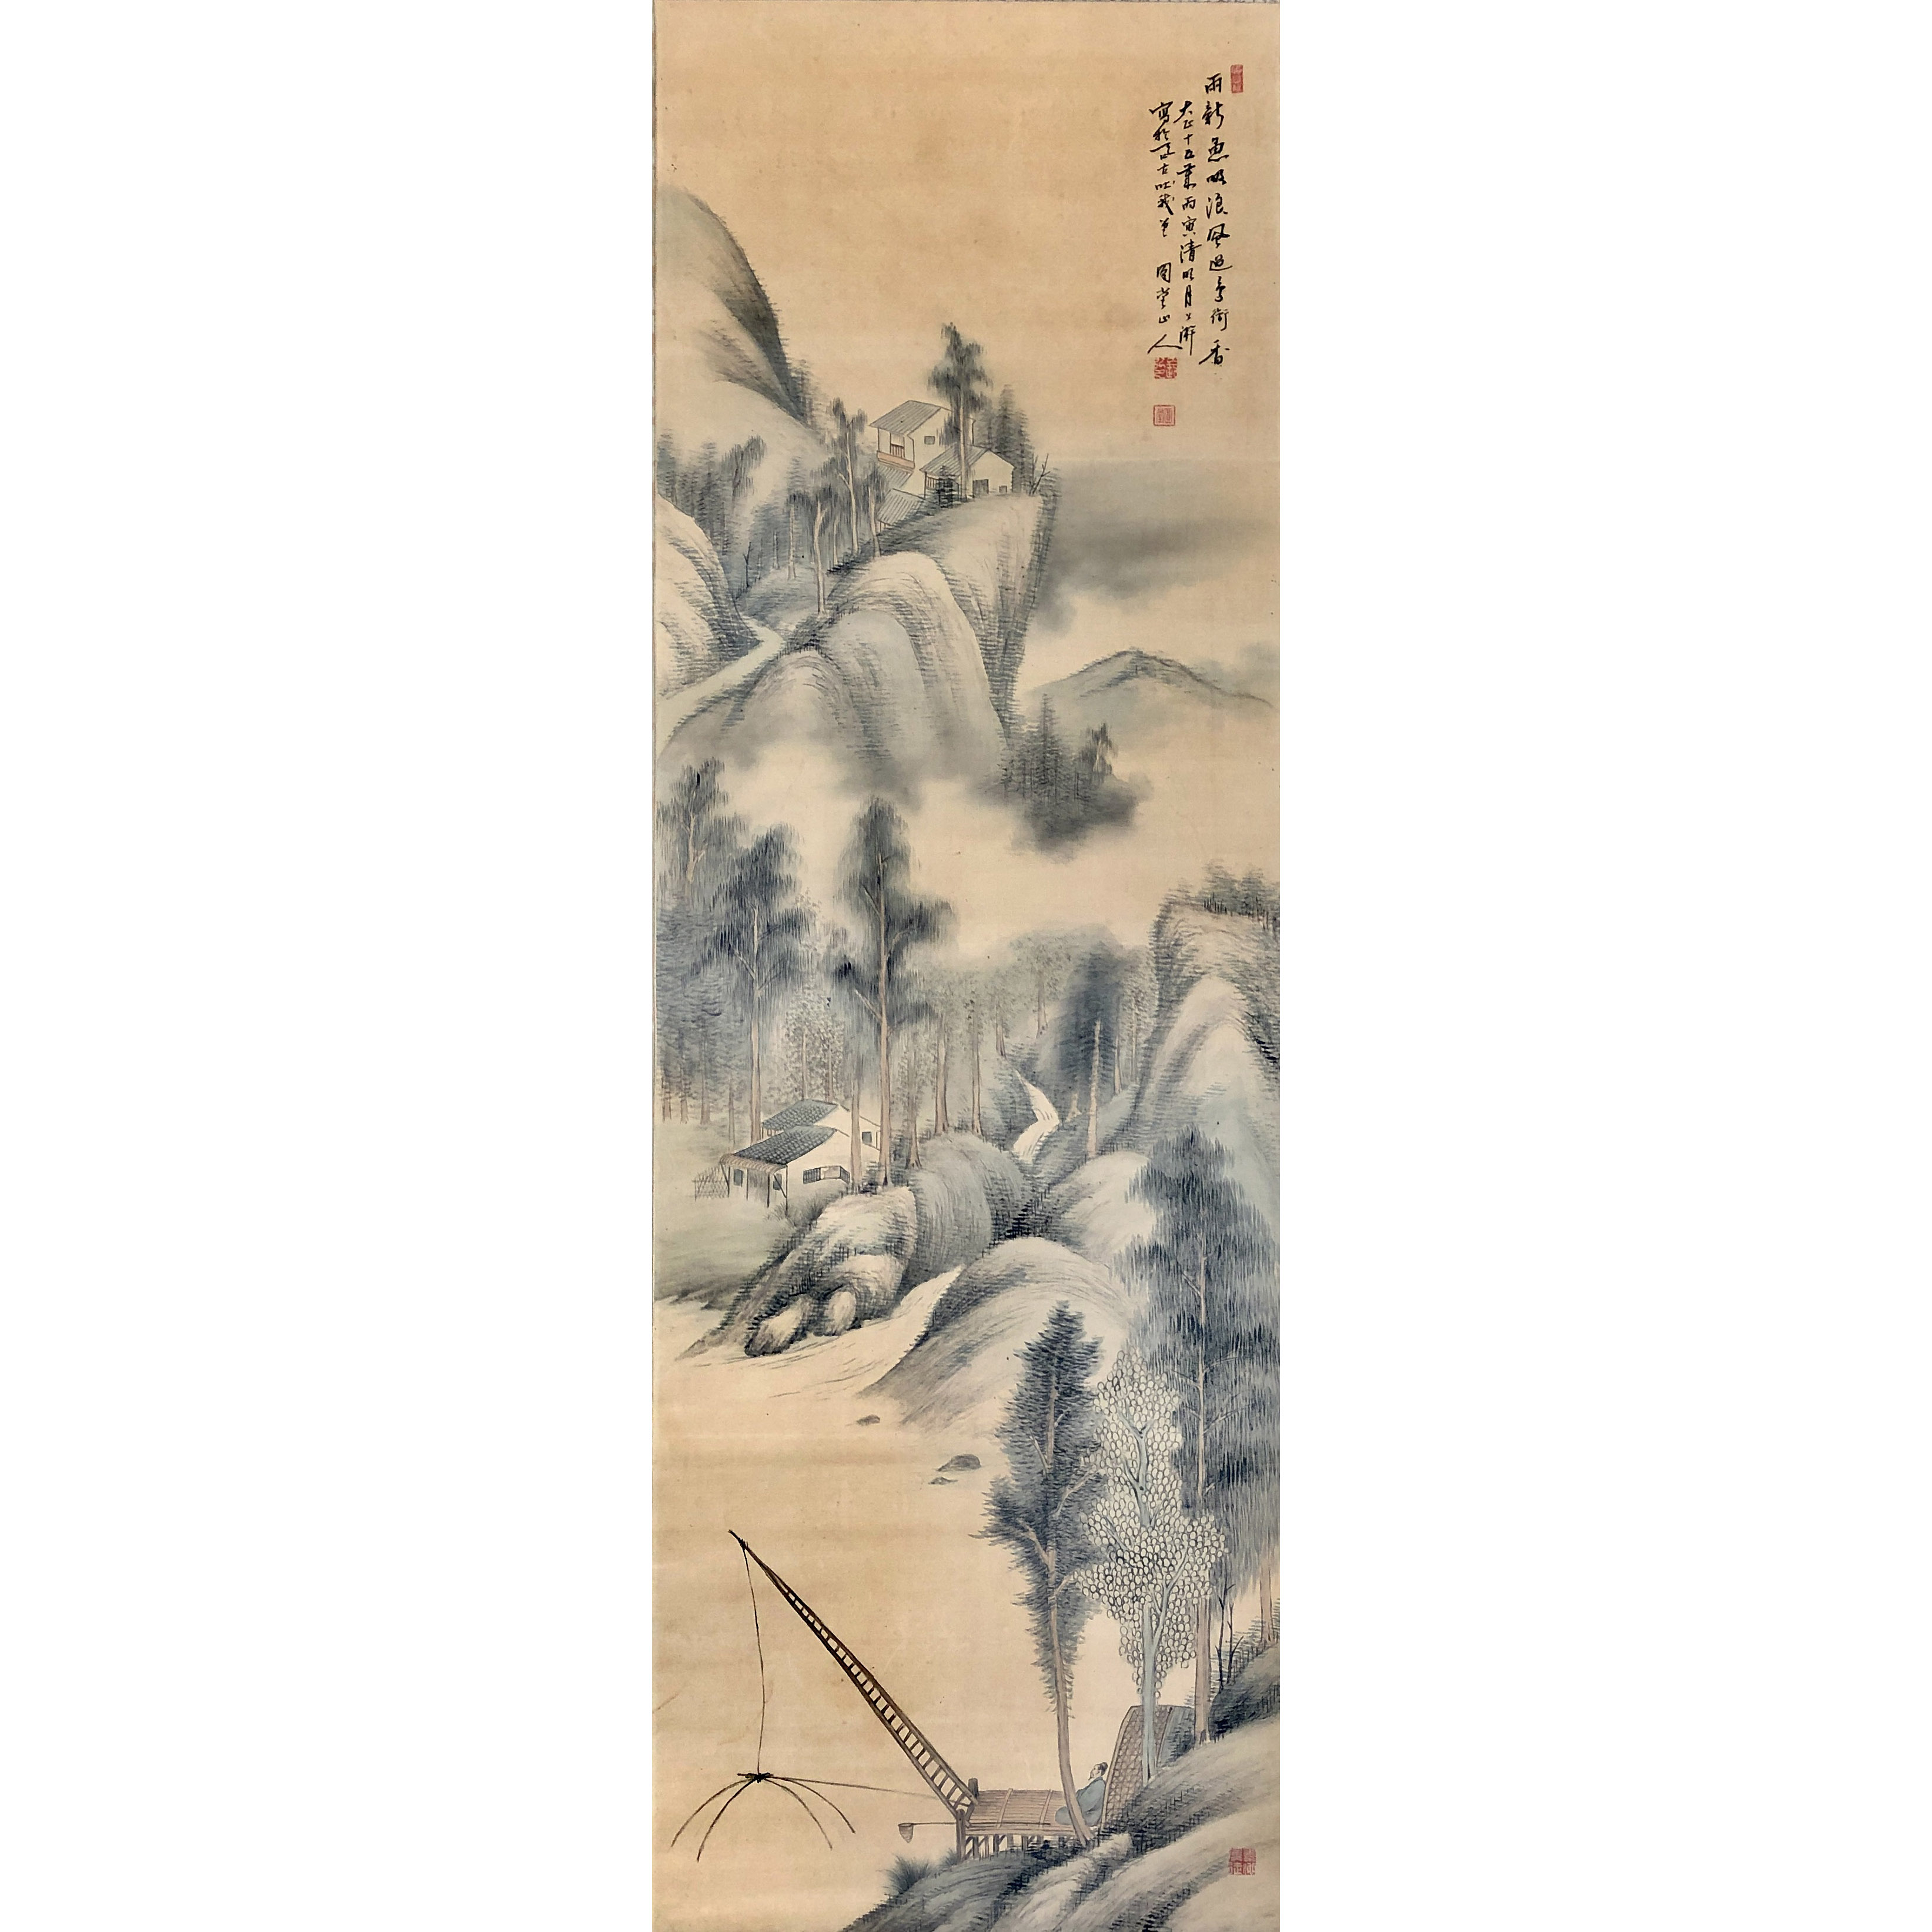 A Chinese landscape in watercolour, probably late 19th/early 20th century